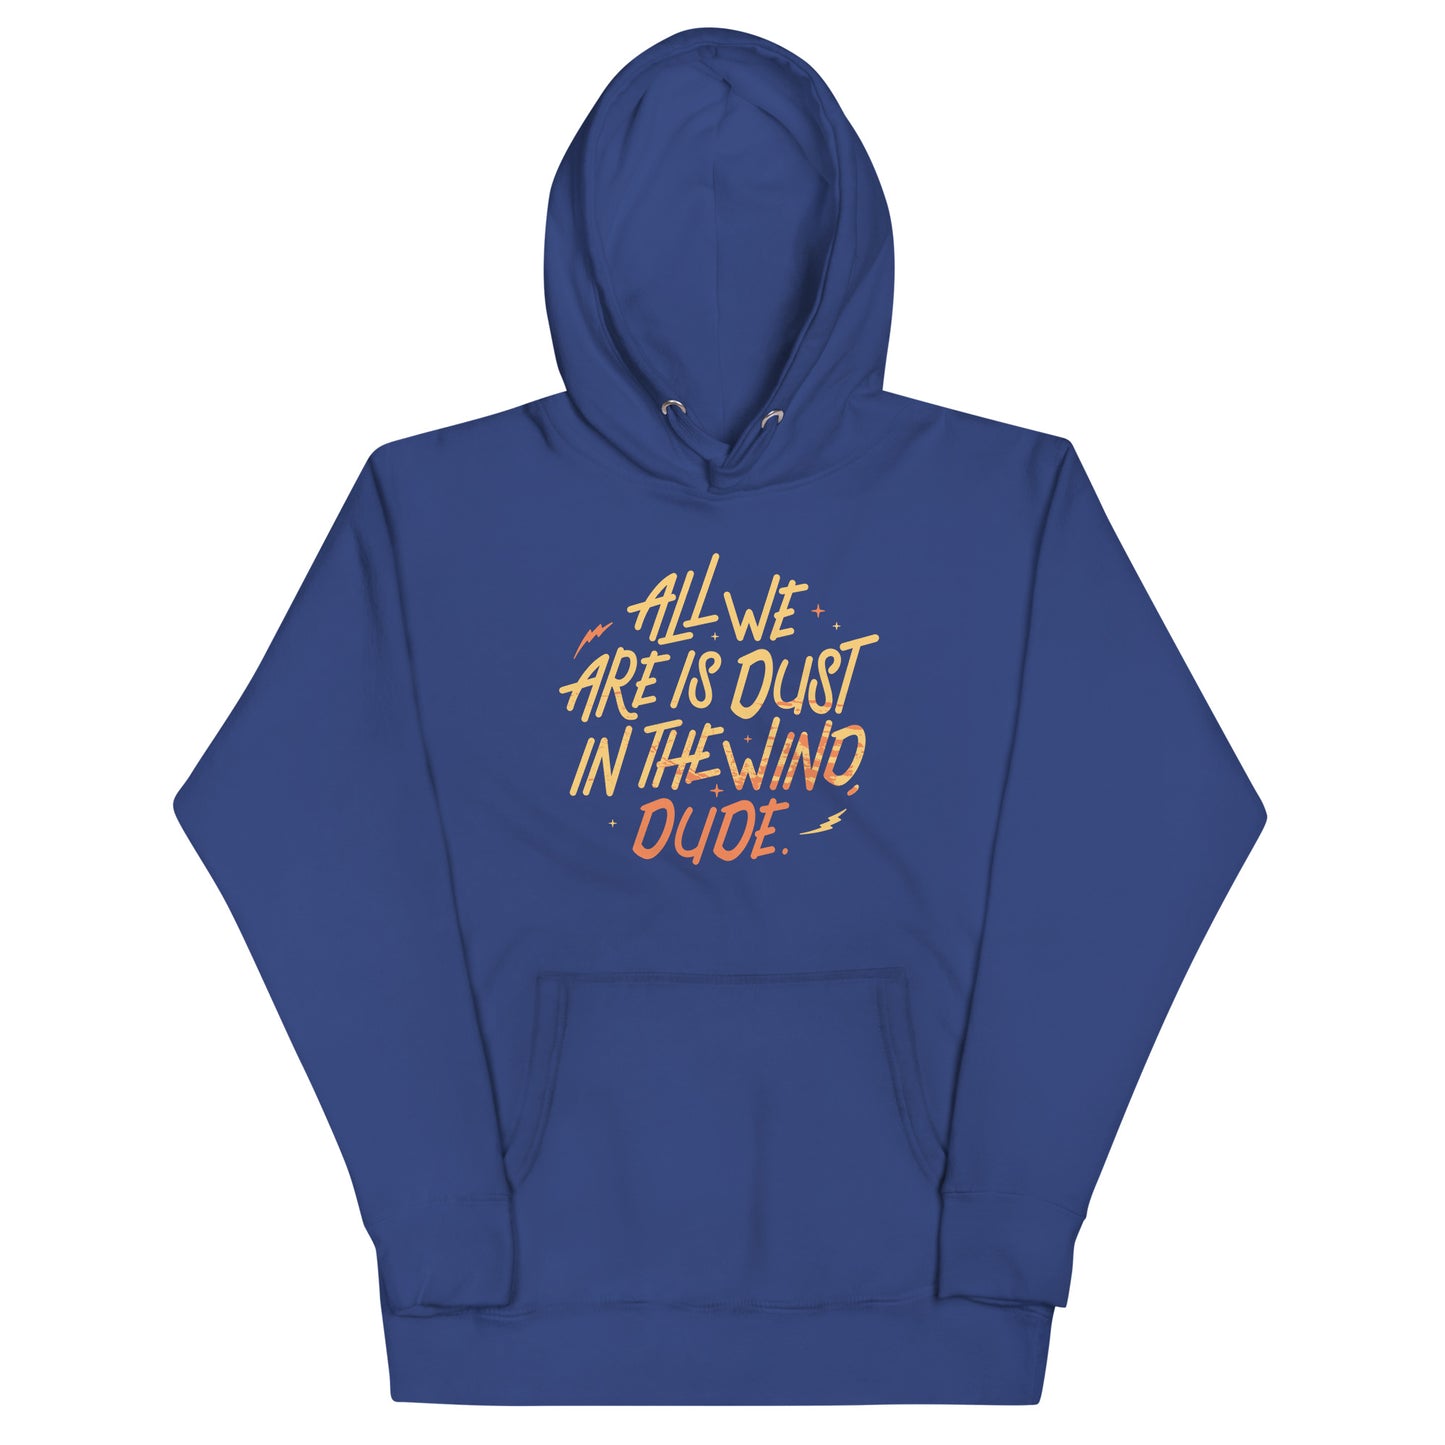 All We Are Is Dust In The Wind, Dude Unisex Hoodie